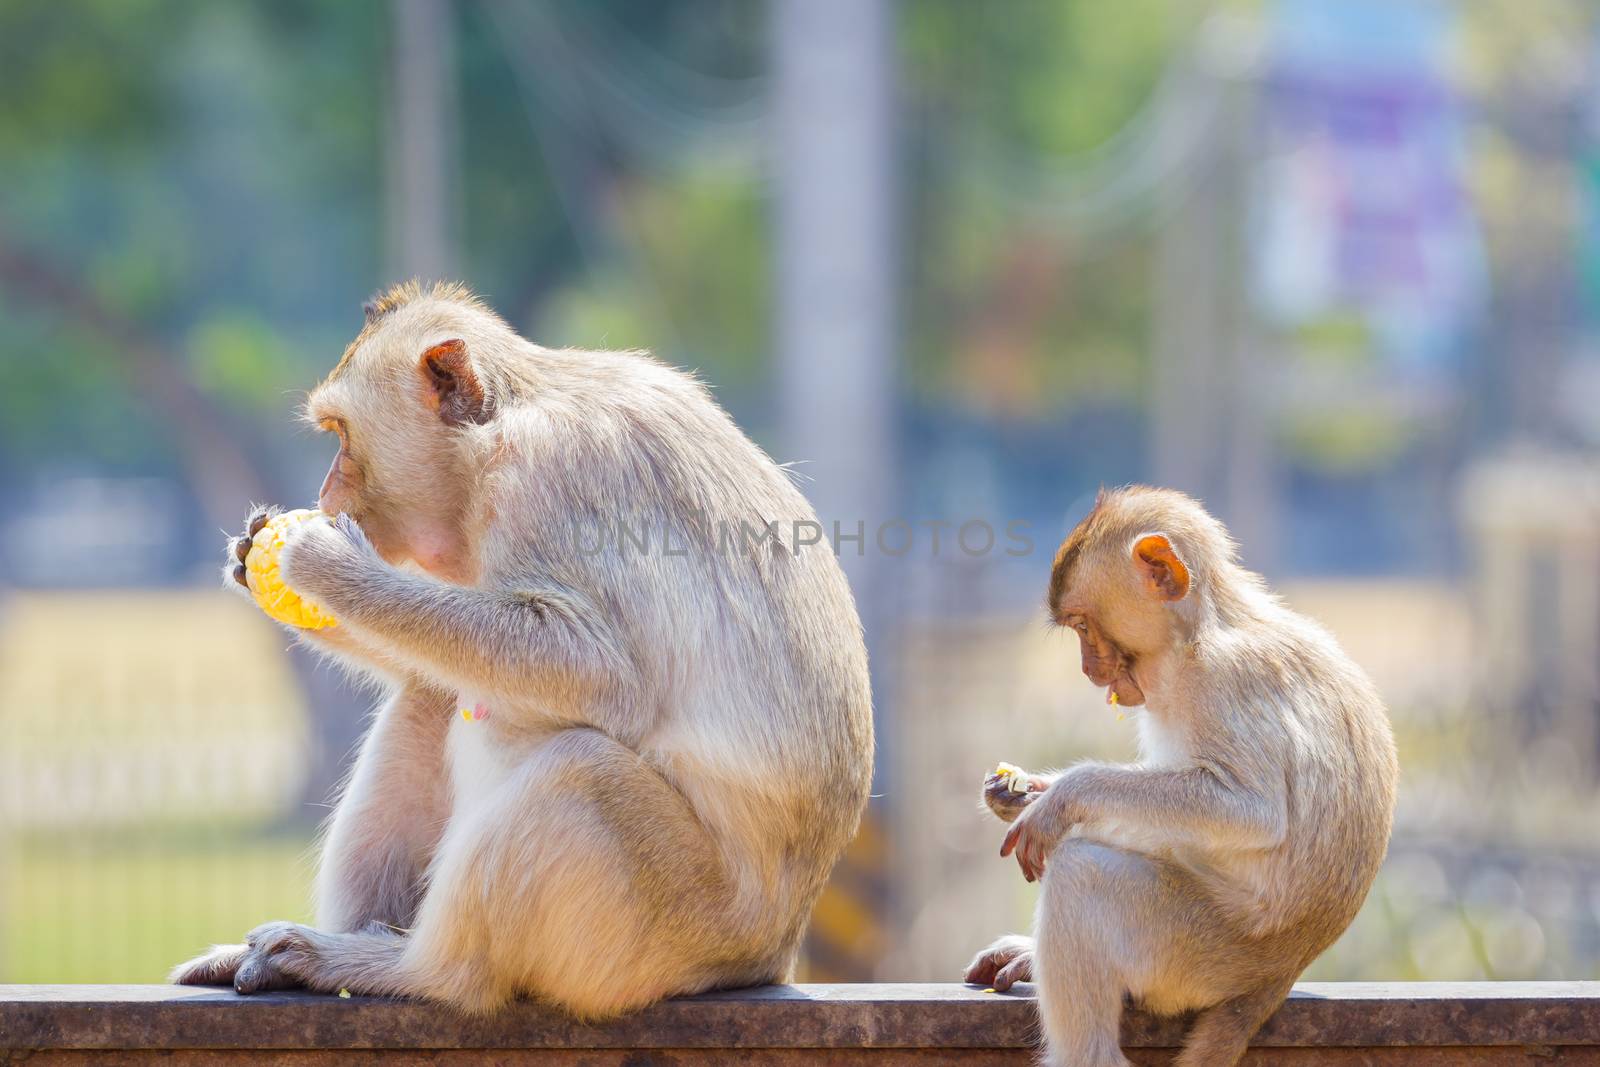 mother and baby monkey eating fresh corn on a rusty fence, shallow depth of field.